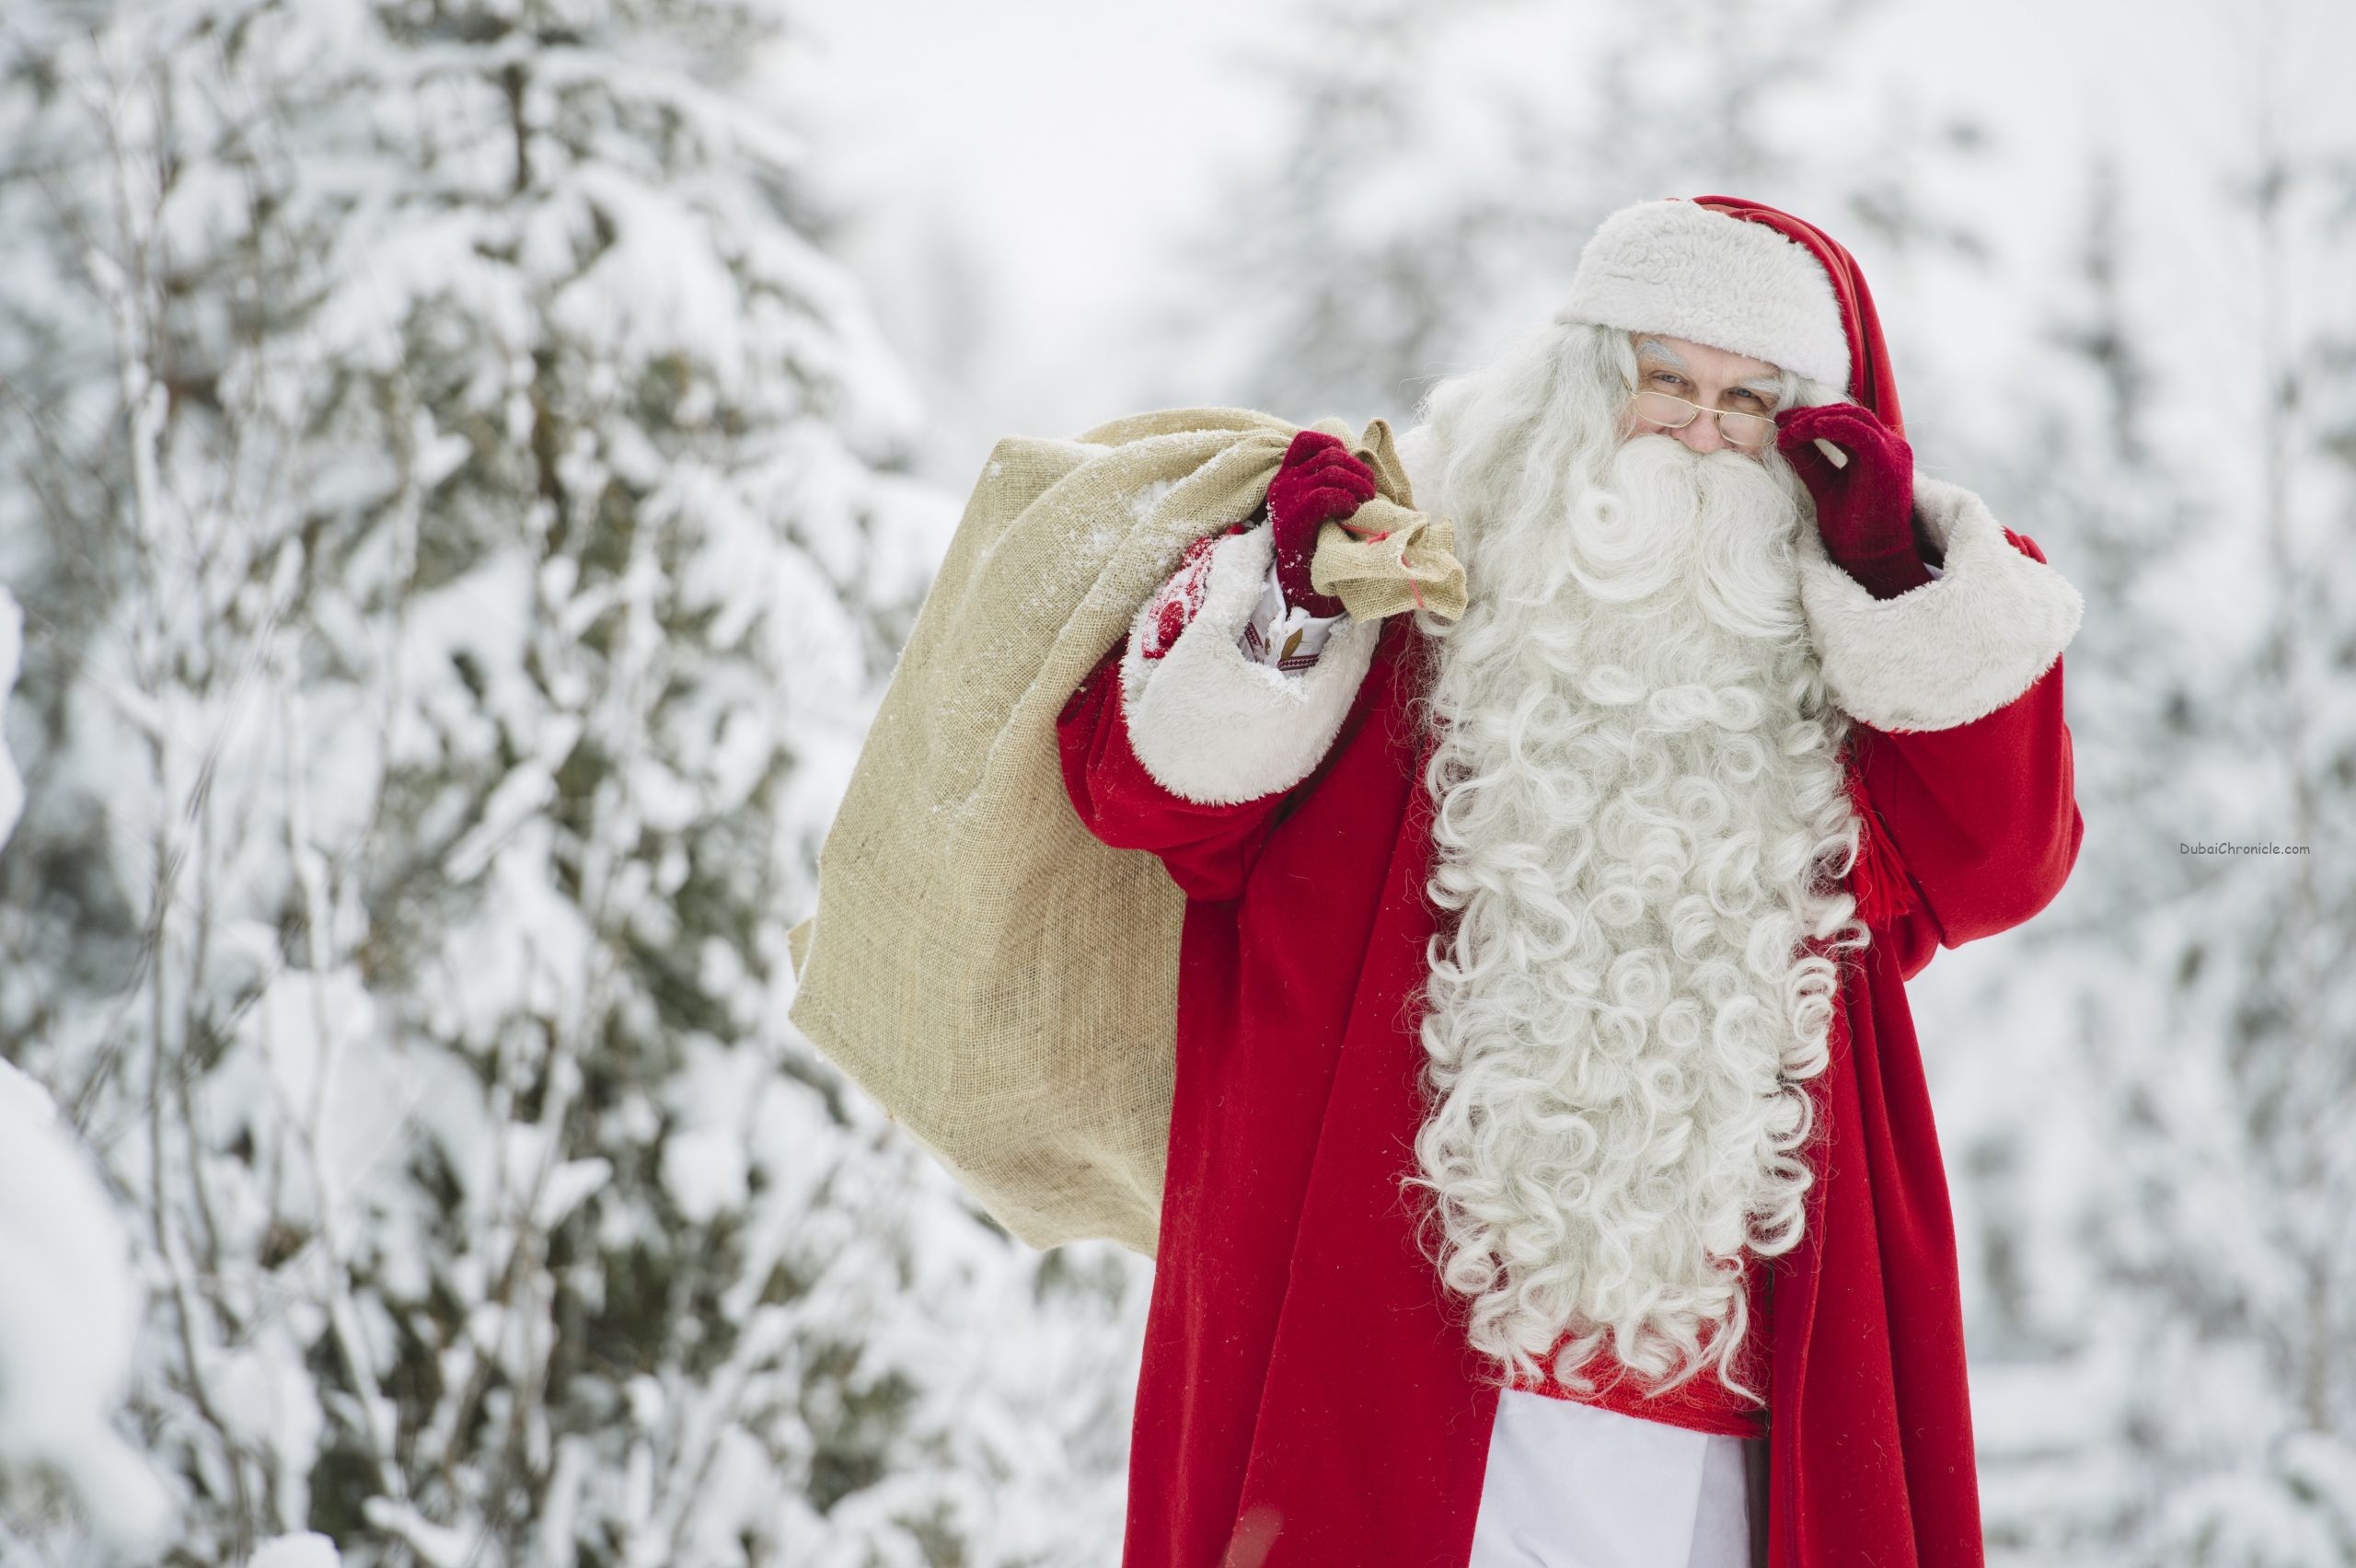 As part of Finland at Expo 2020 Dubai’s Christmas celebrations, Santa Claus will be arriving in Dubai all the way from his workshop in Korvatunturi, Finland.